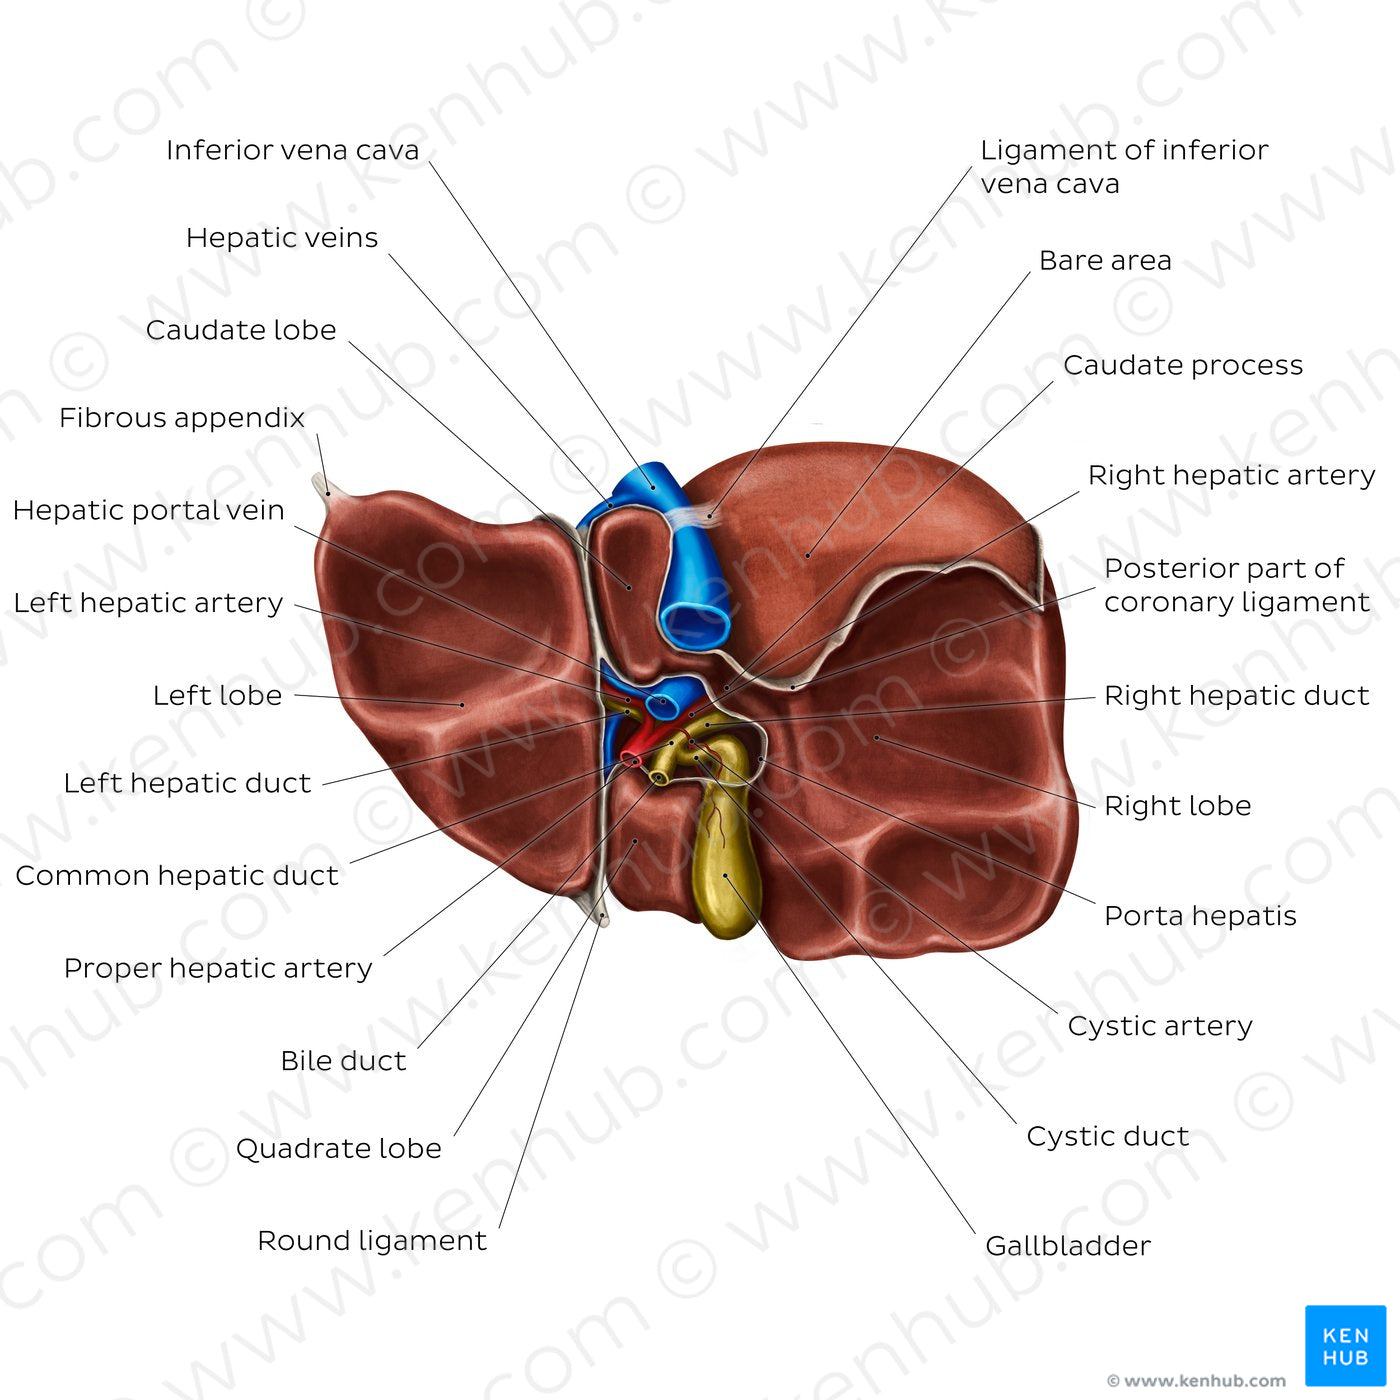 Inferior view of the liver (English)